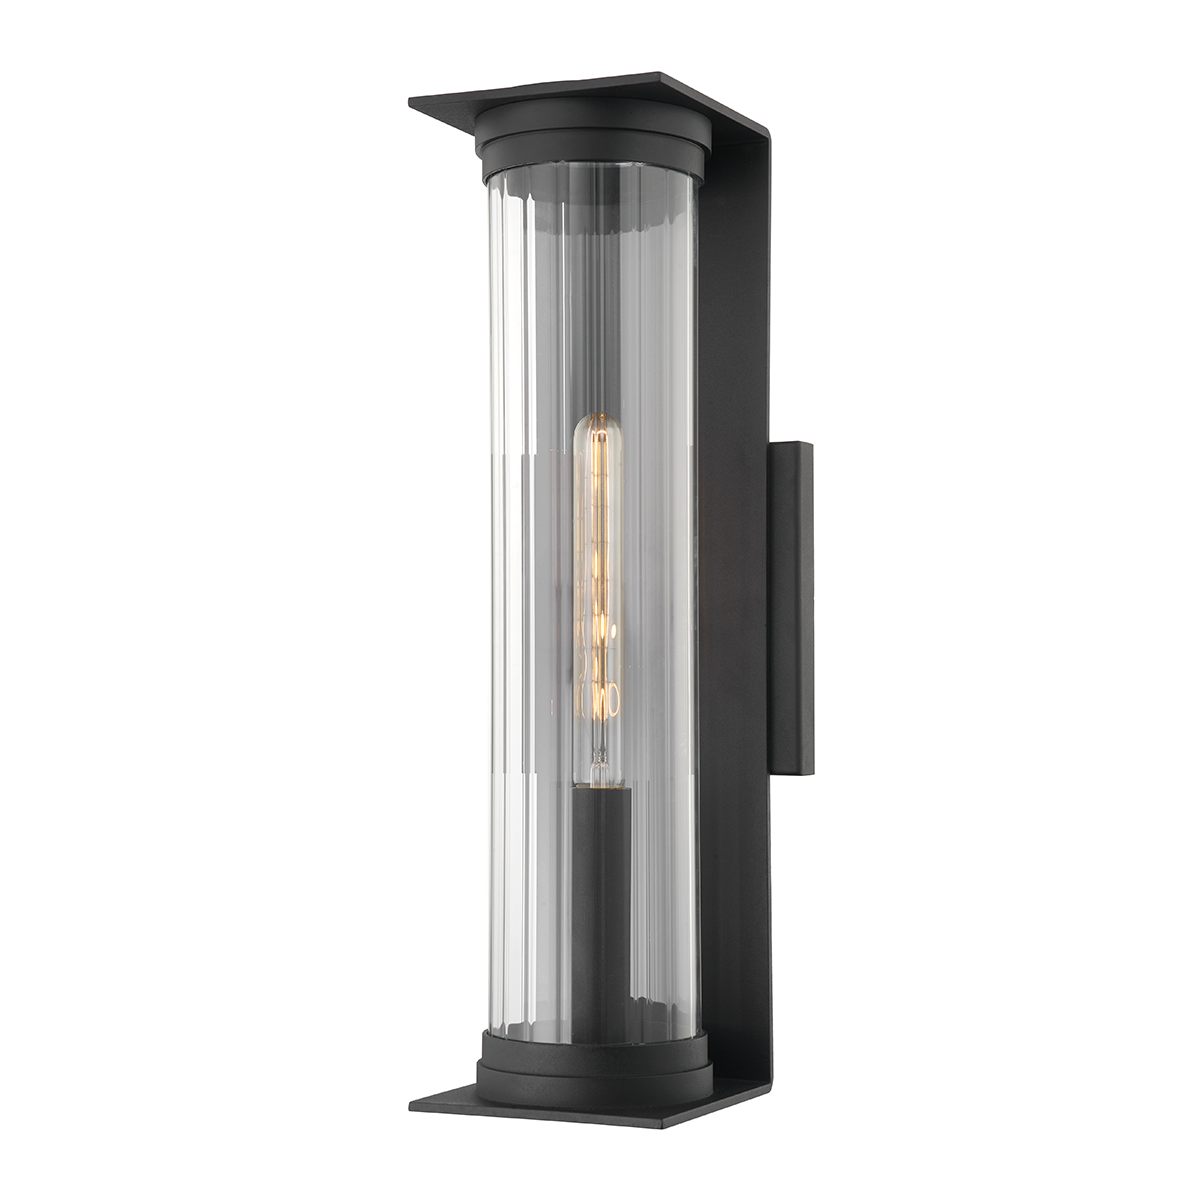 Troy Lighting 1 LIGHT LARGE EXTERIOR WALL SCONCE B1323 Outdoor l Wall Troy Lighting TEXTURED BLACK  